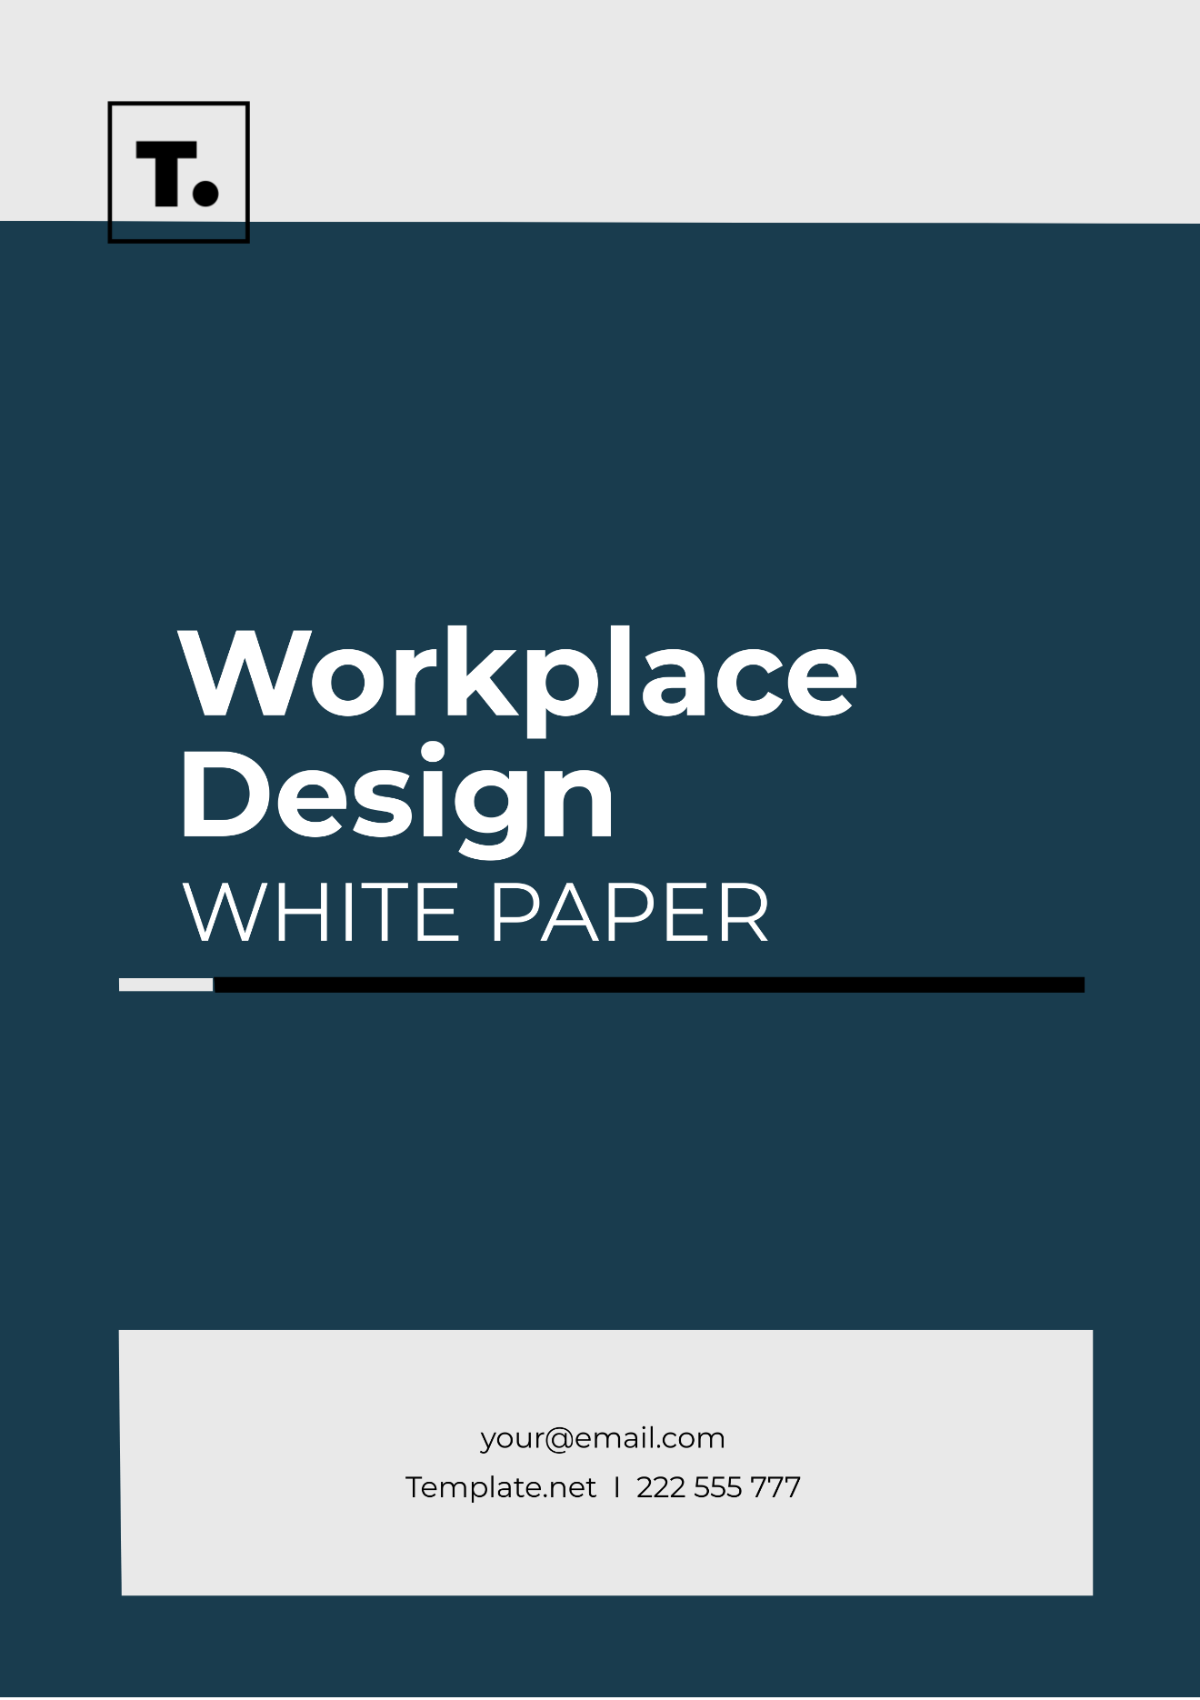 Workplace Design White Paper Template